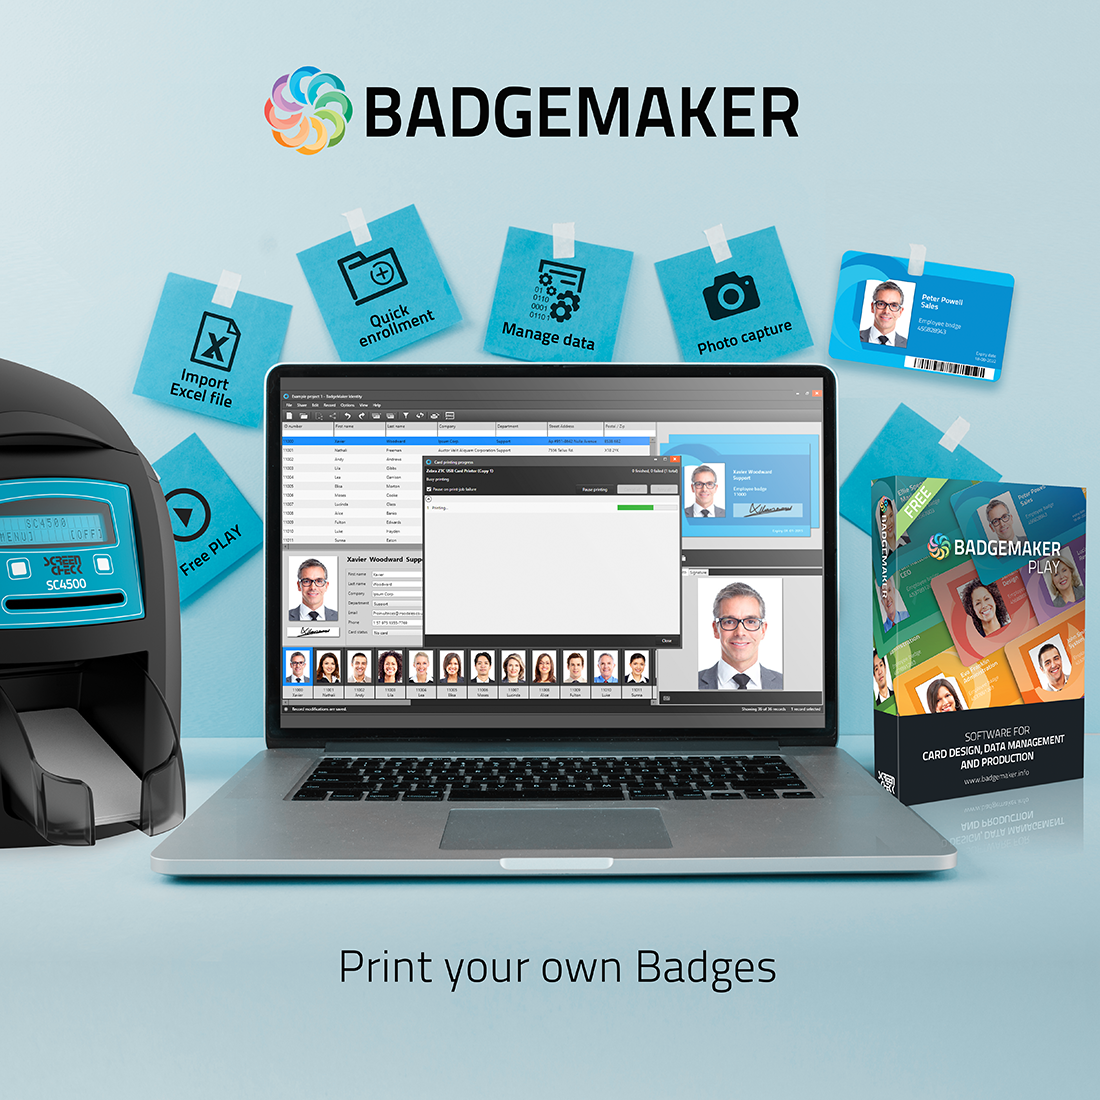 button badge maker software free download